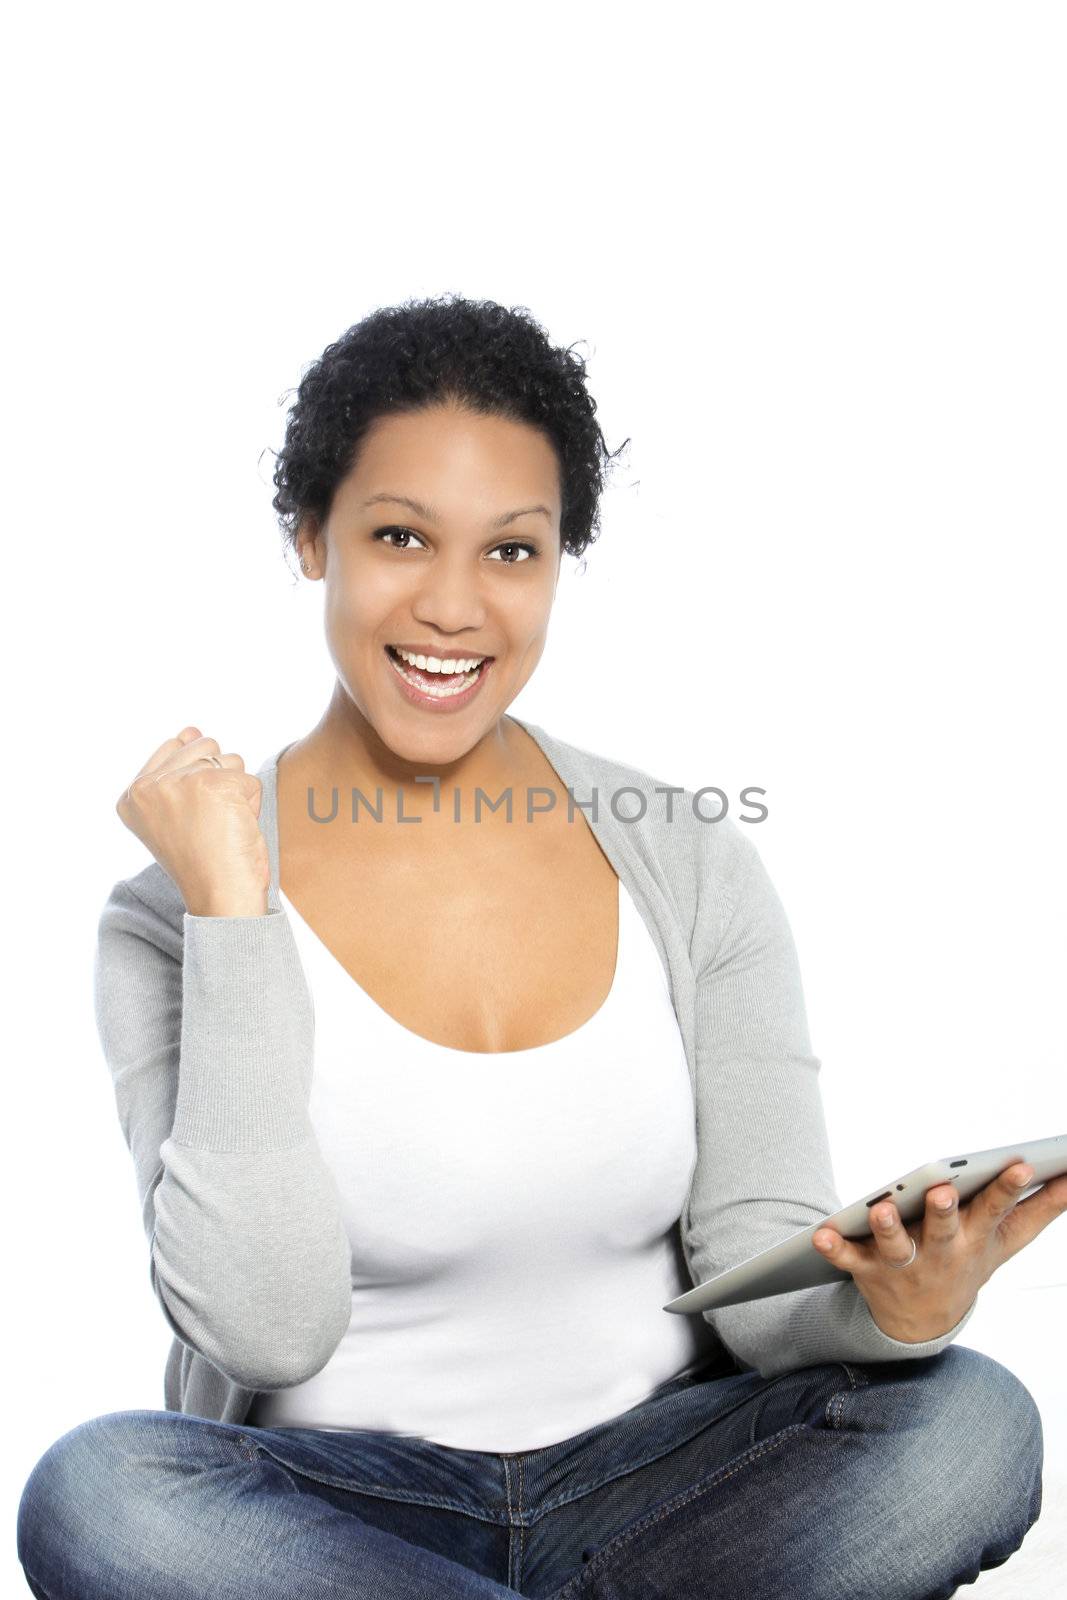 Happy woman raising her fist and holding tablet-pc on her other hand